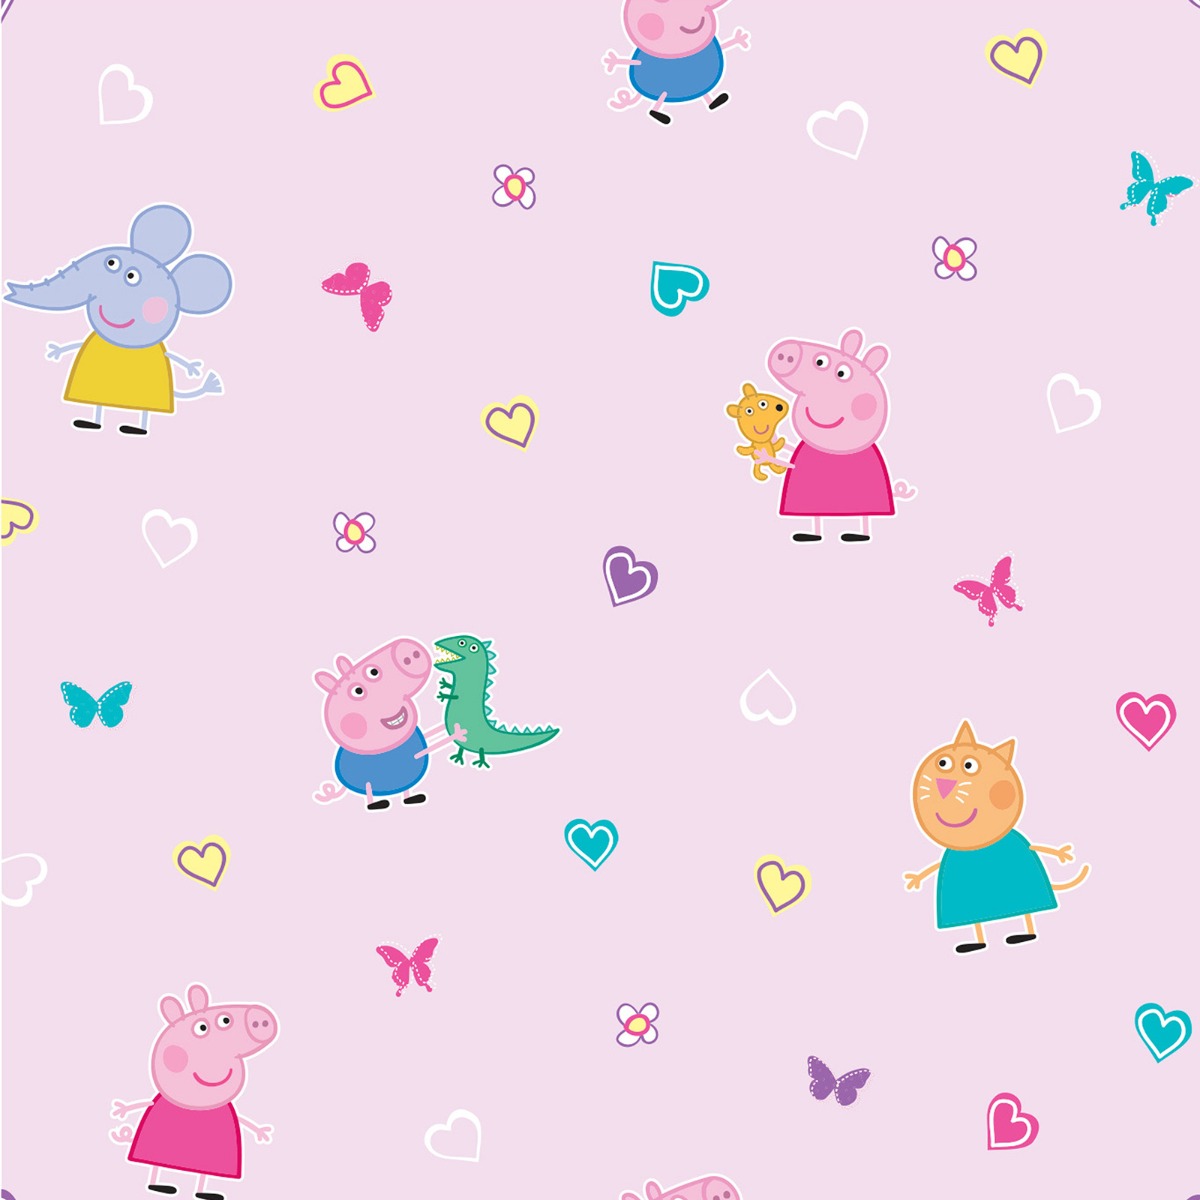 Peppa Pig House Wallpaper Explained - Or let them think about their